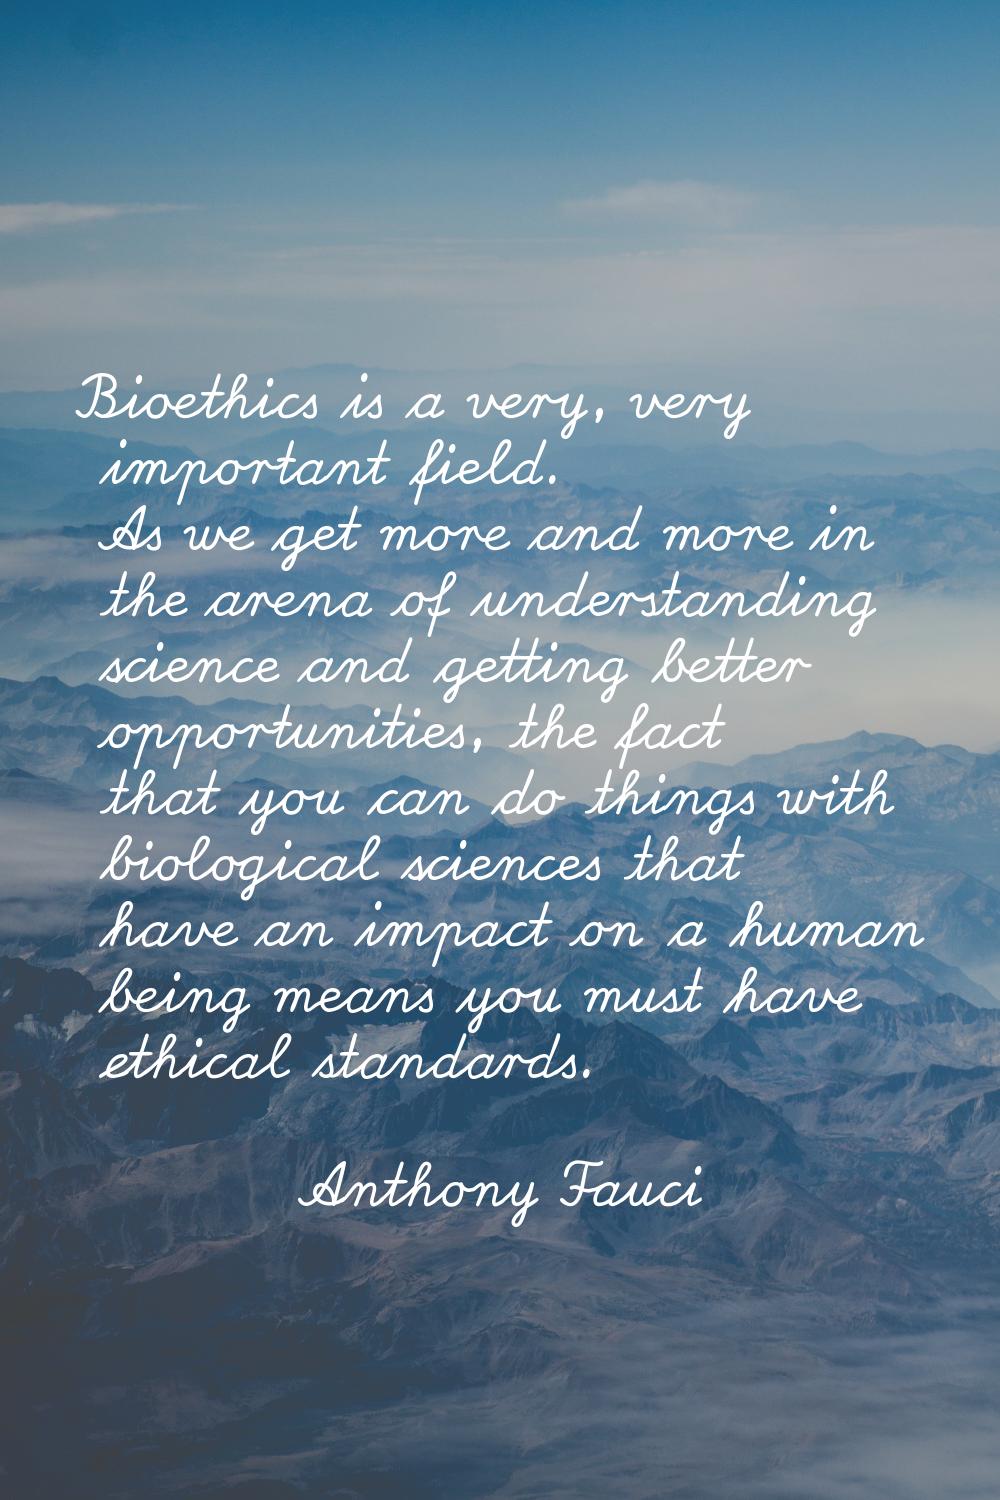 Bioethics is a very, very important field. As we get more and more in the arena of understanding sc